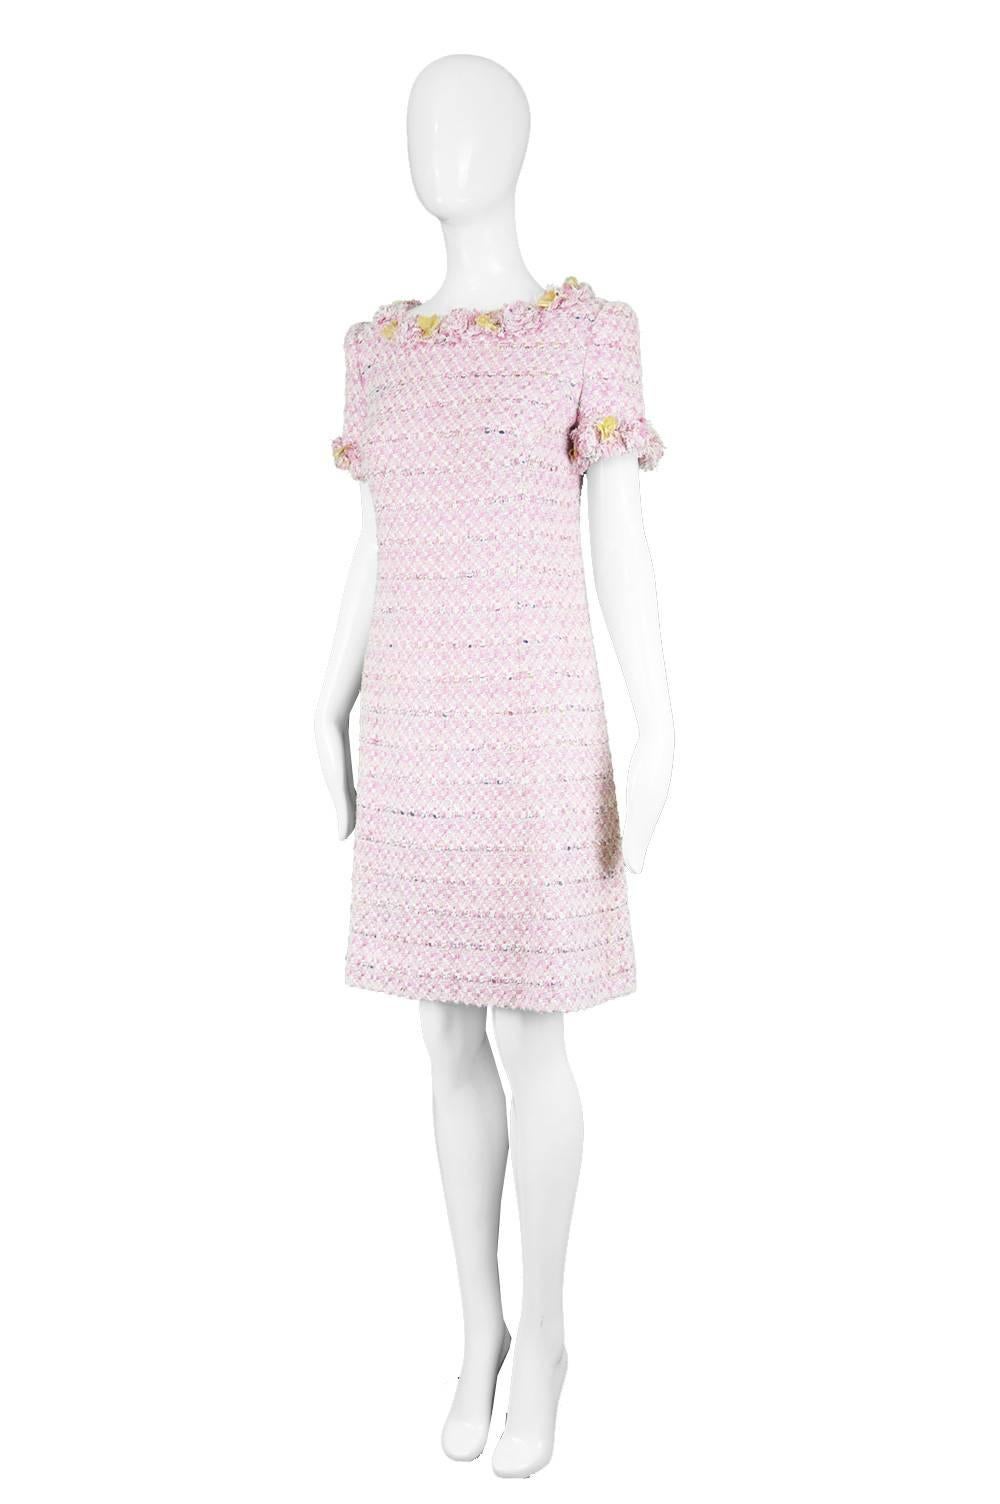 Women's Bellville Sassoon Vintage Pink and White Bouclé Tweed Shift Dress, 1990s